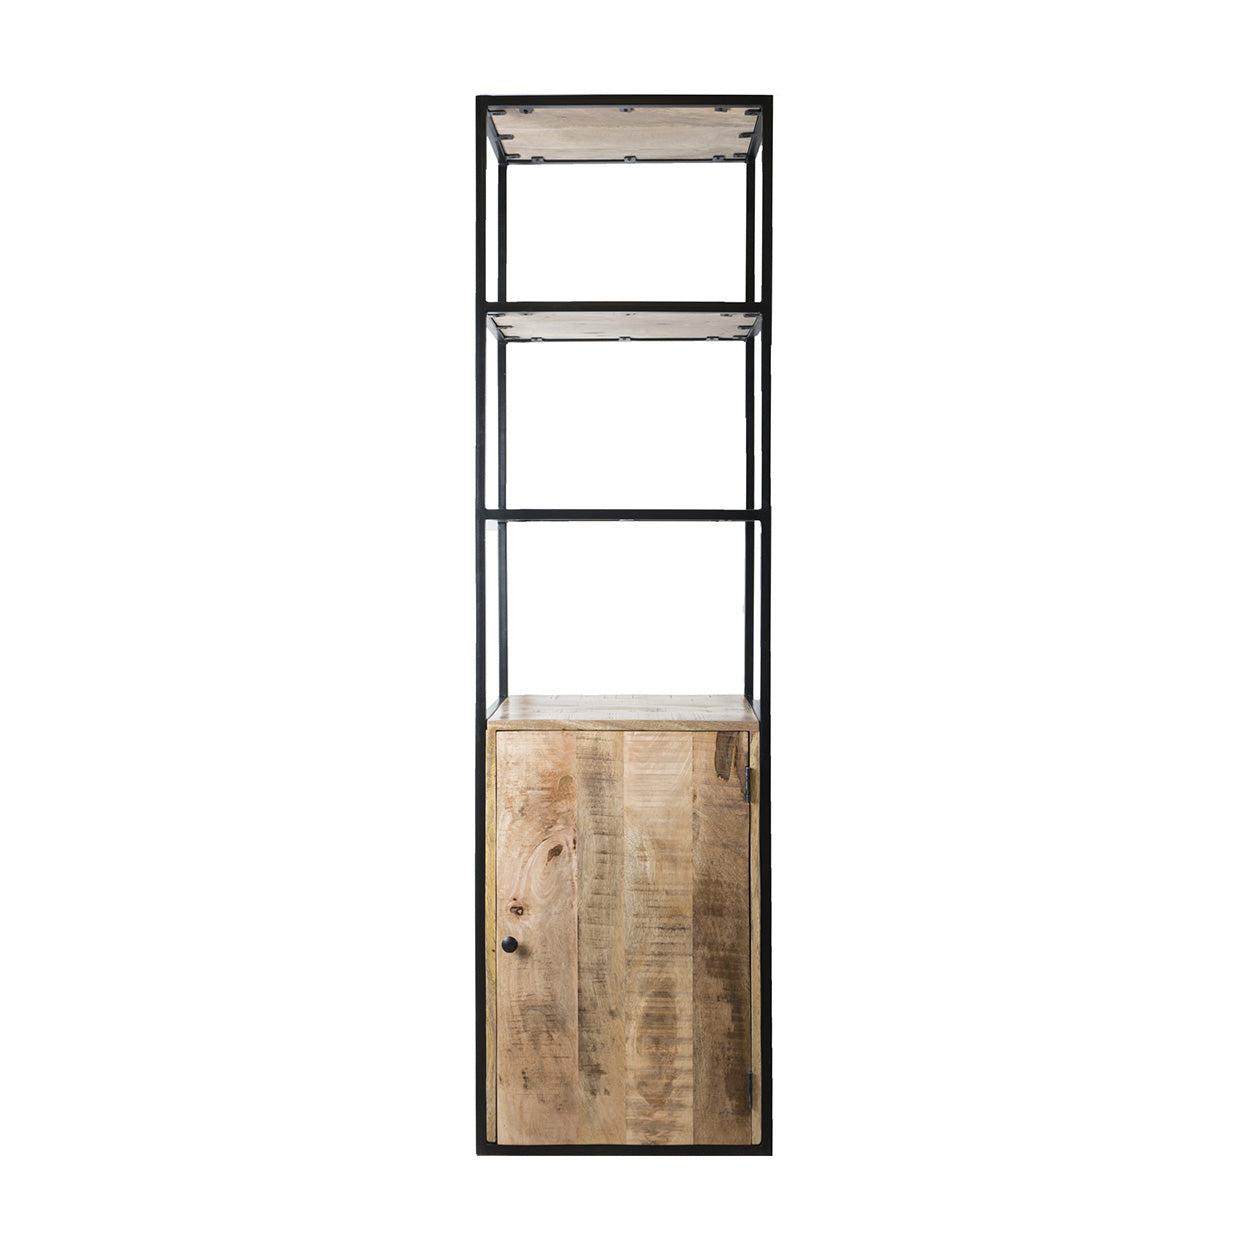 Cil Wandkast 200 x 55 cm Hout - House of Baboon - Home67